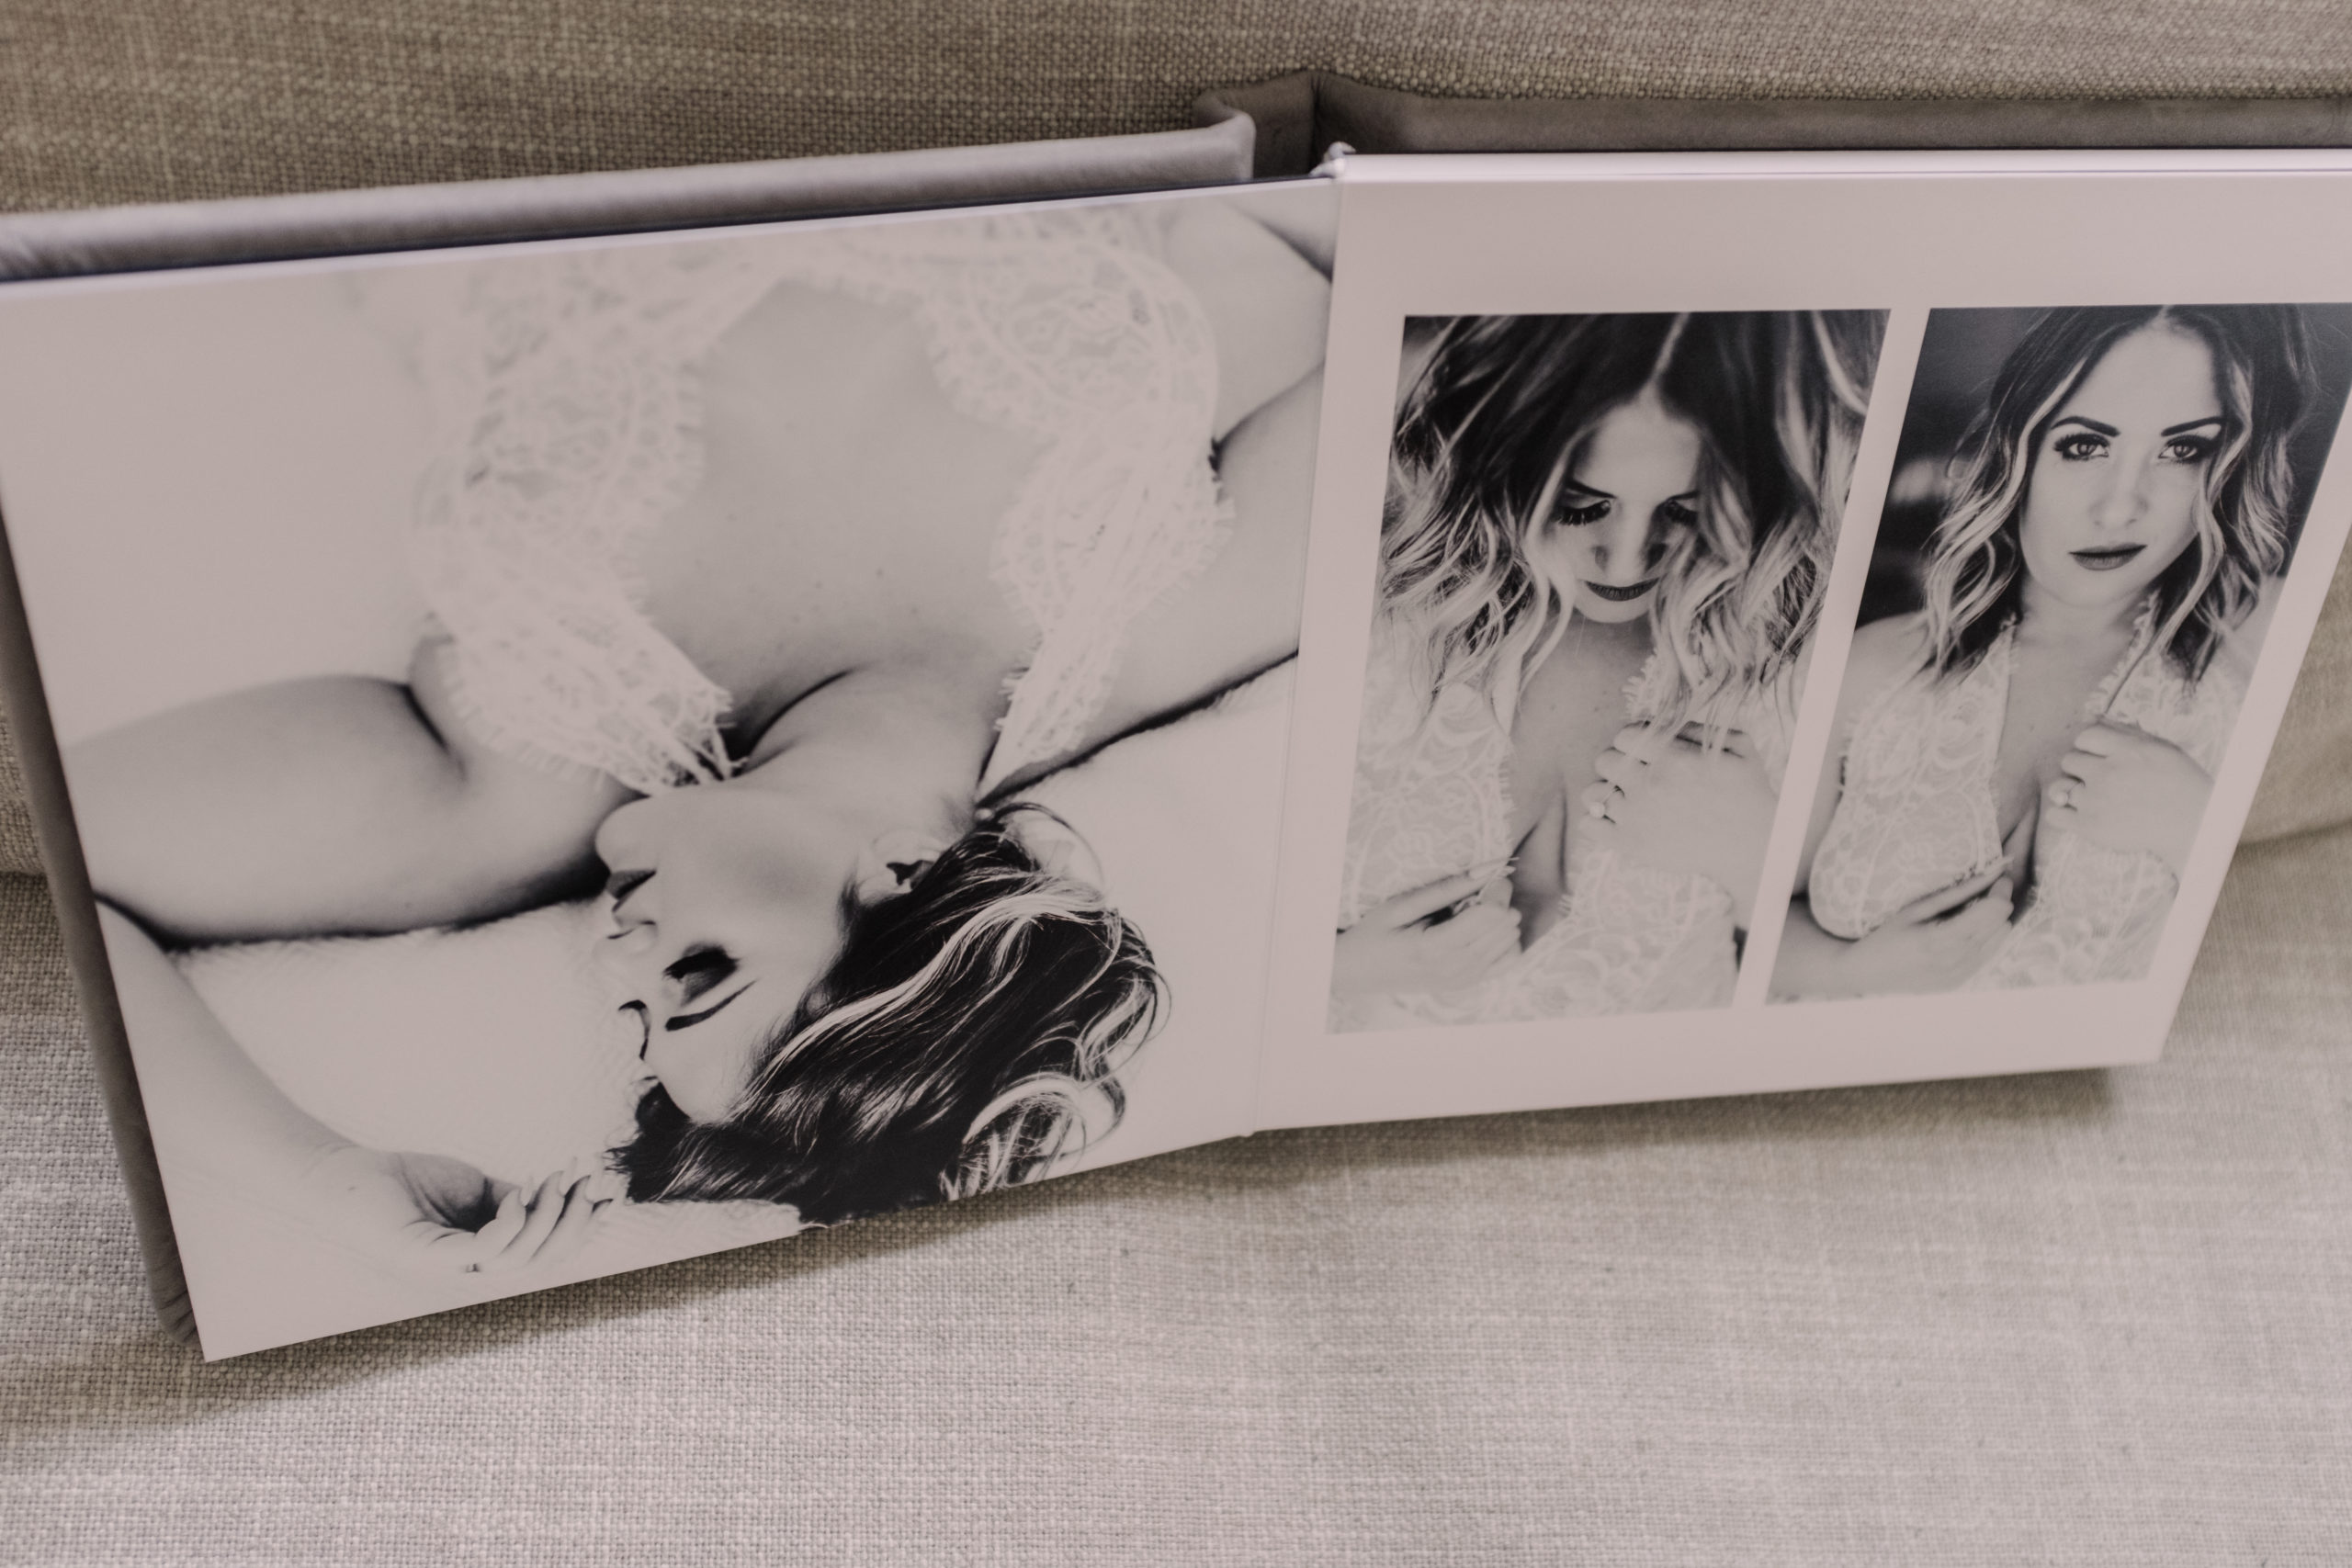 A bridal boudoir album to be gifted to the bride's fiance on the wedding day.